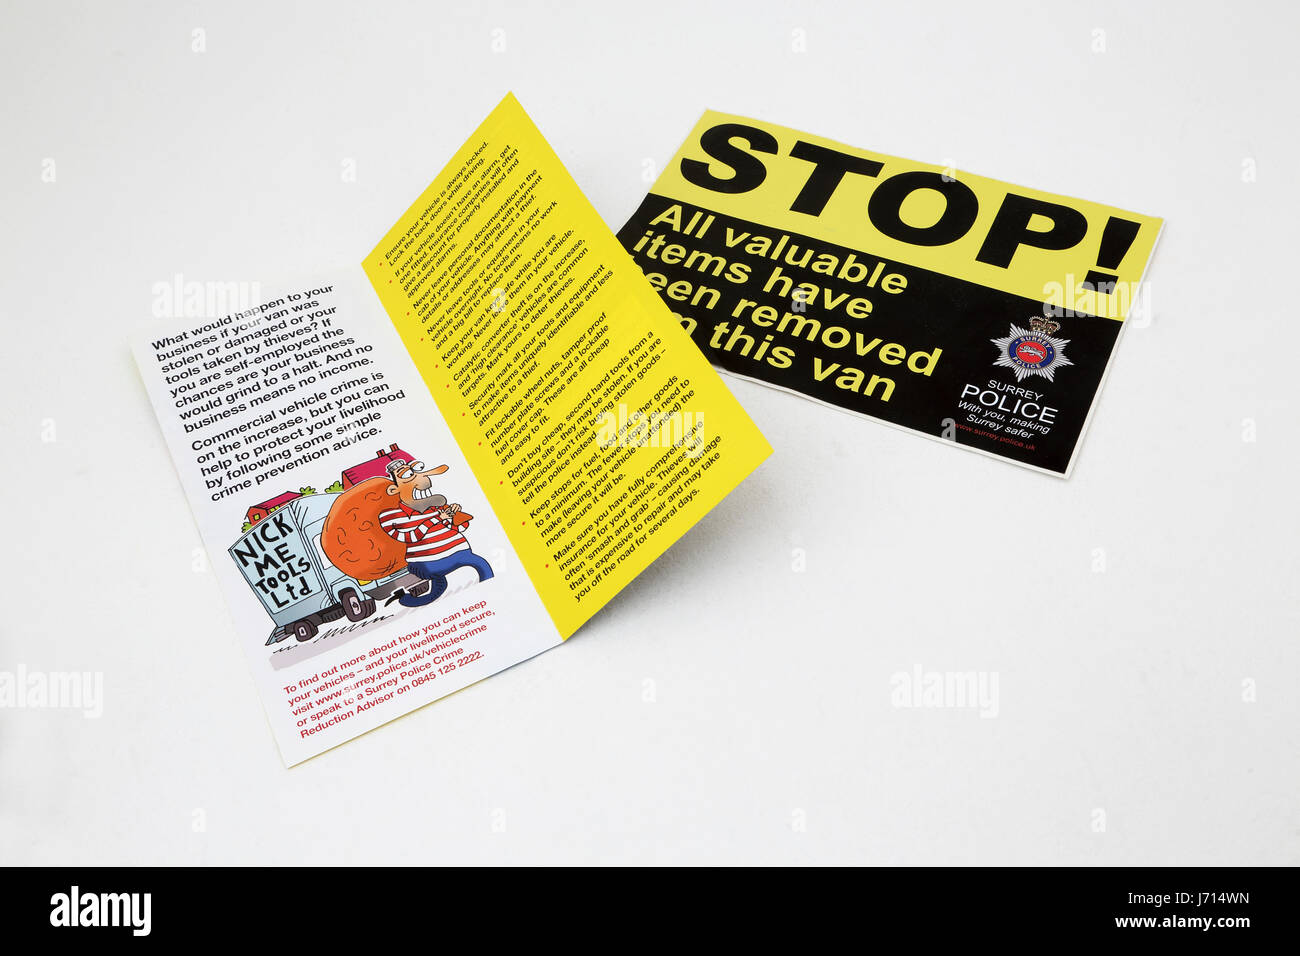 Police leaflet warning about commercial vehicle crime and crime prevention sticker Stock Photo